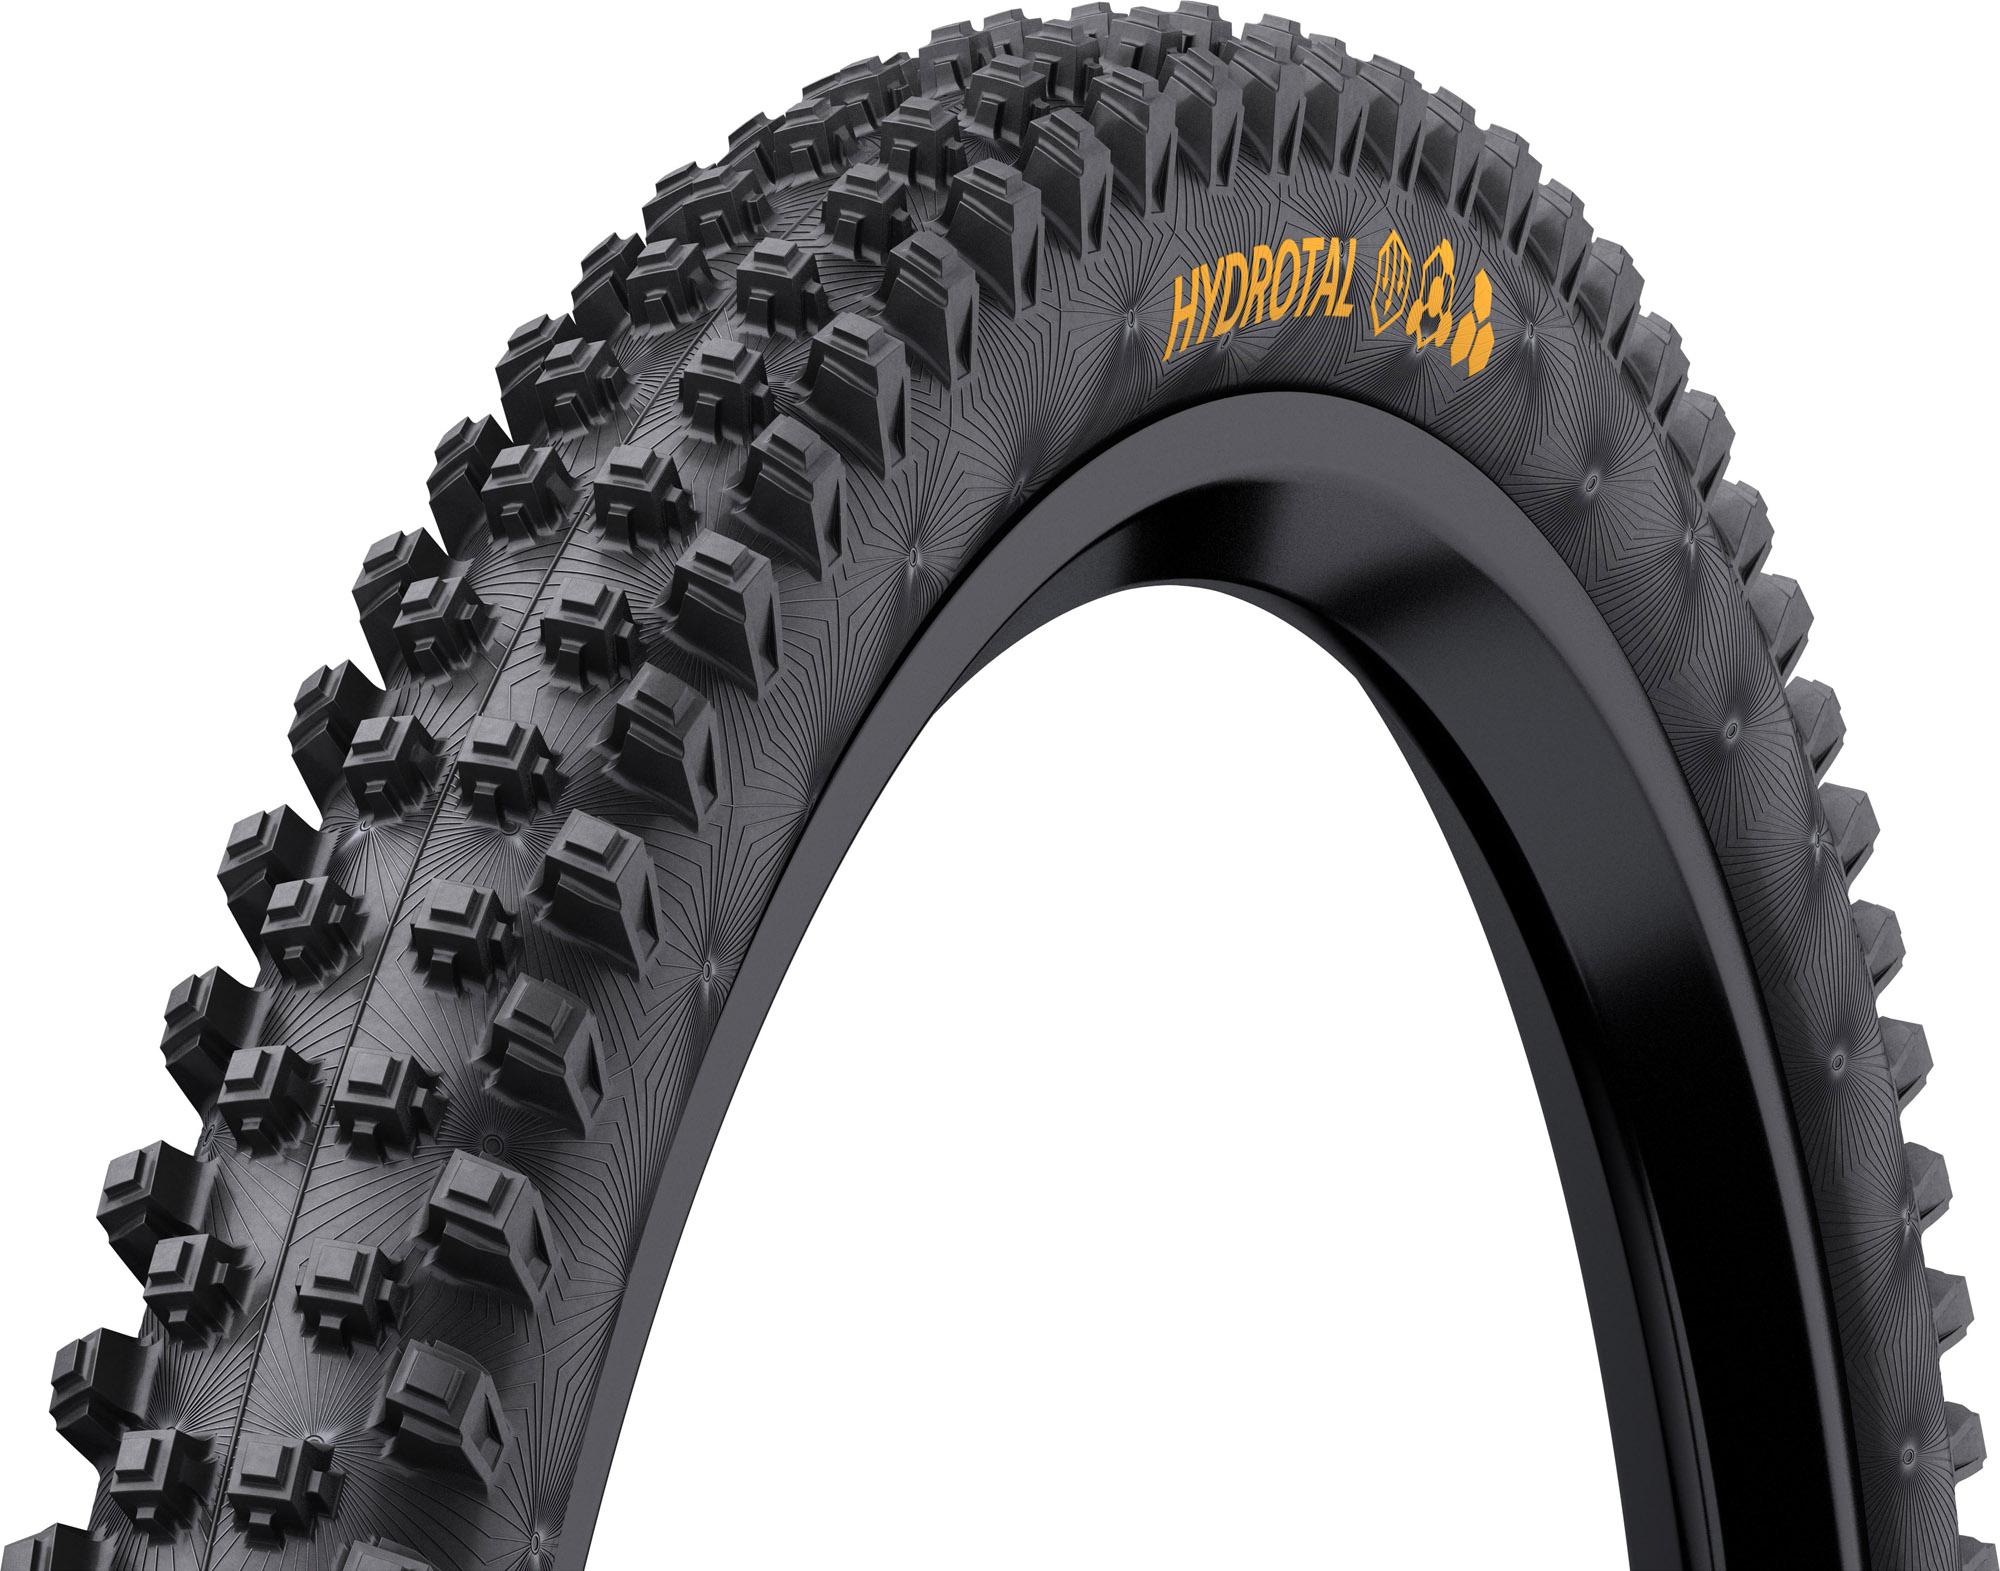 Continental Hydrotal Dh Supersoft Mtb Tyre - Black